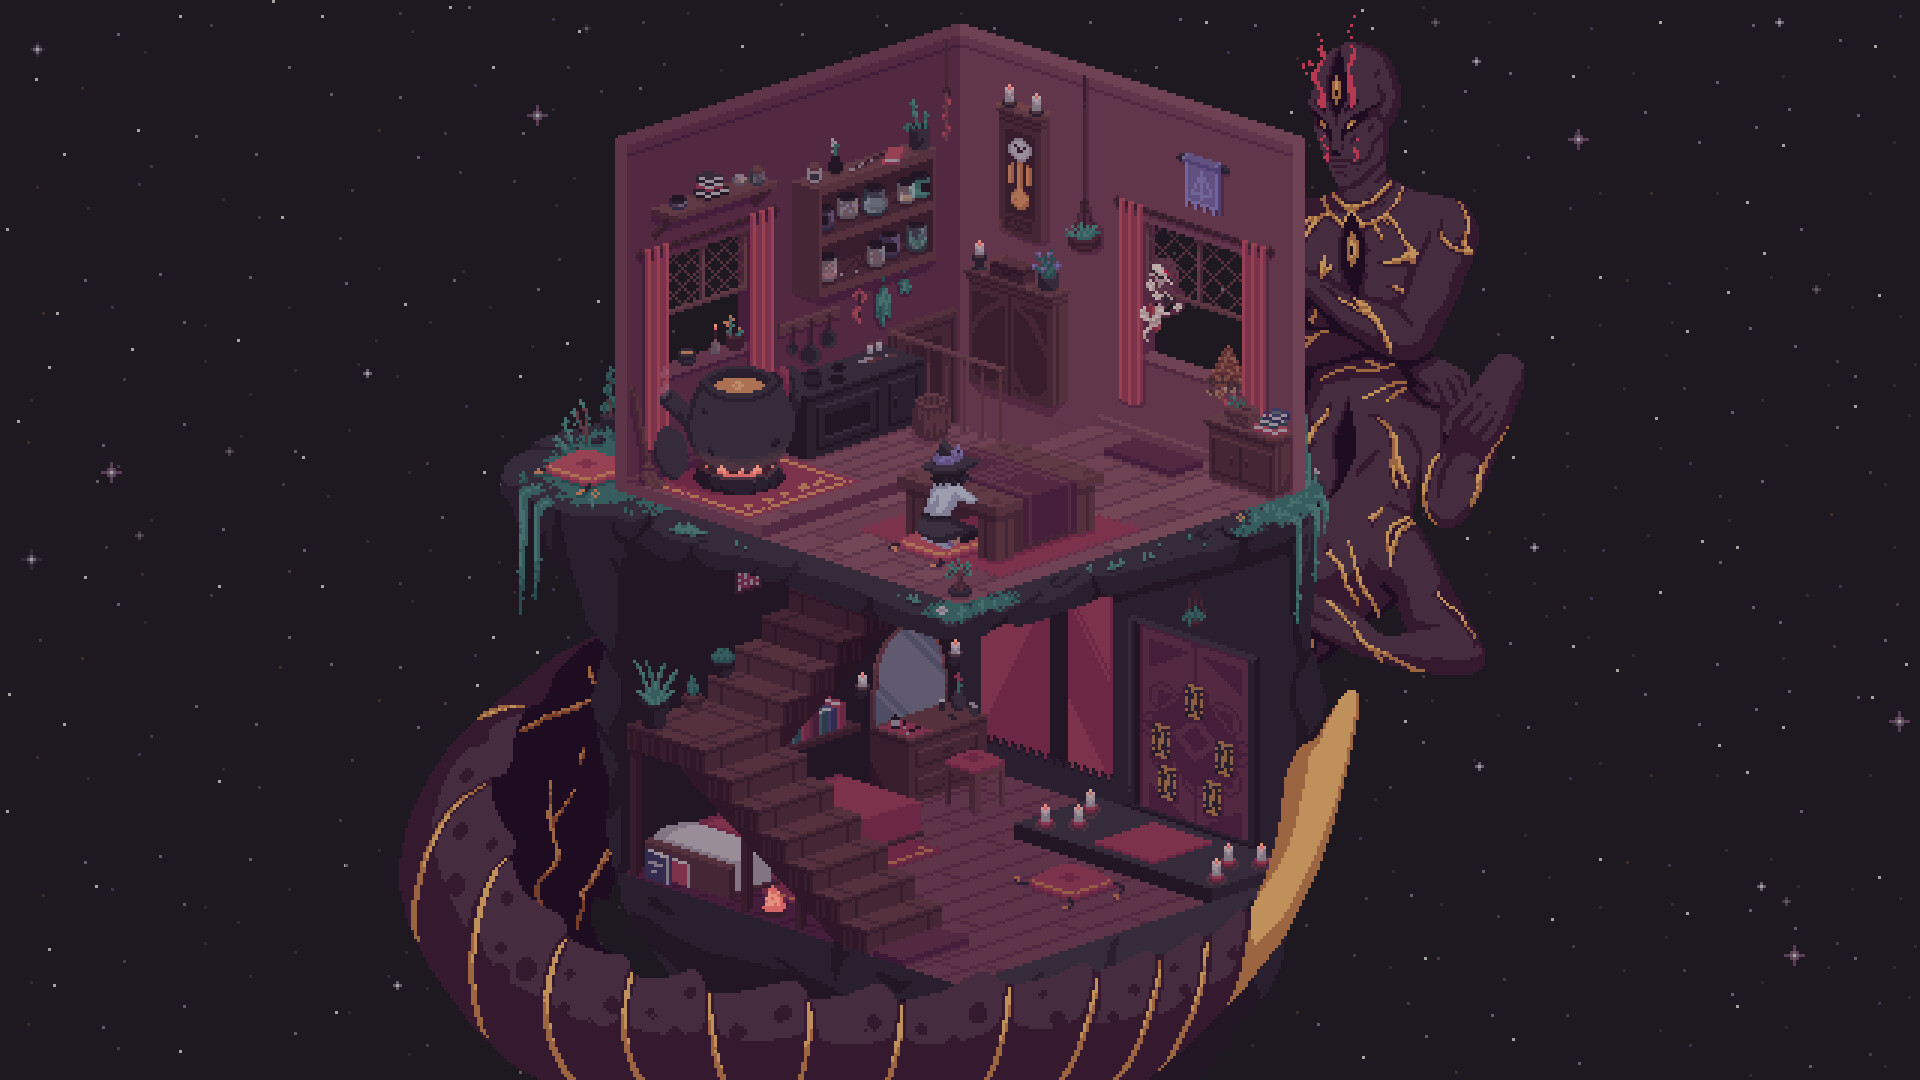 Fortuna and Abramar hang out around the asteroid house in The Cosmic Wheel Sisterhood.